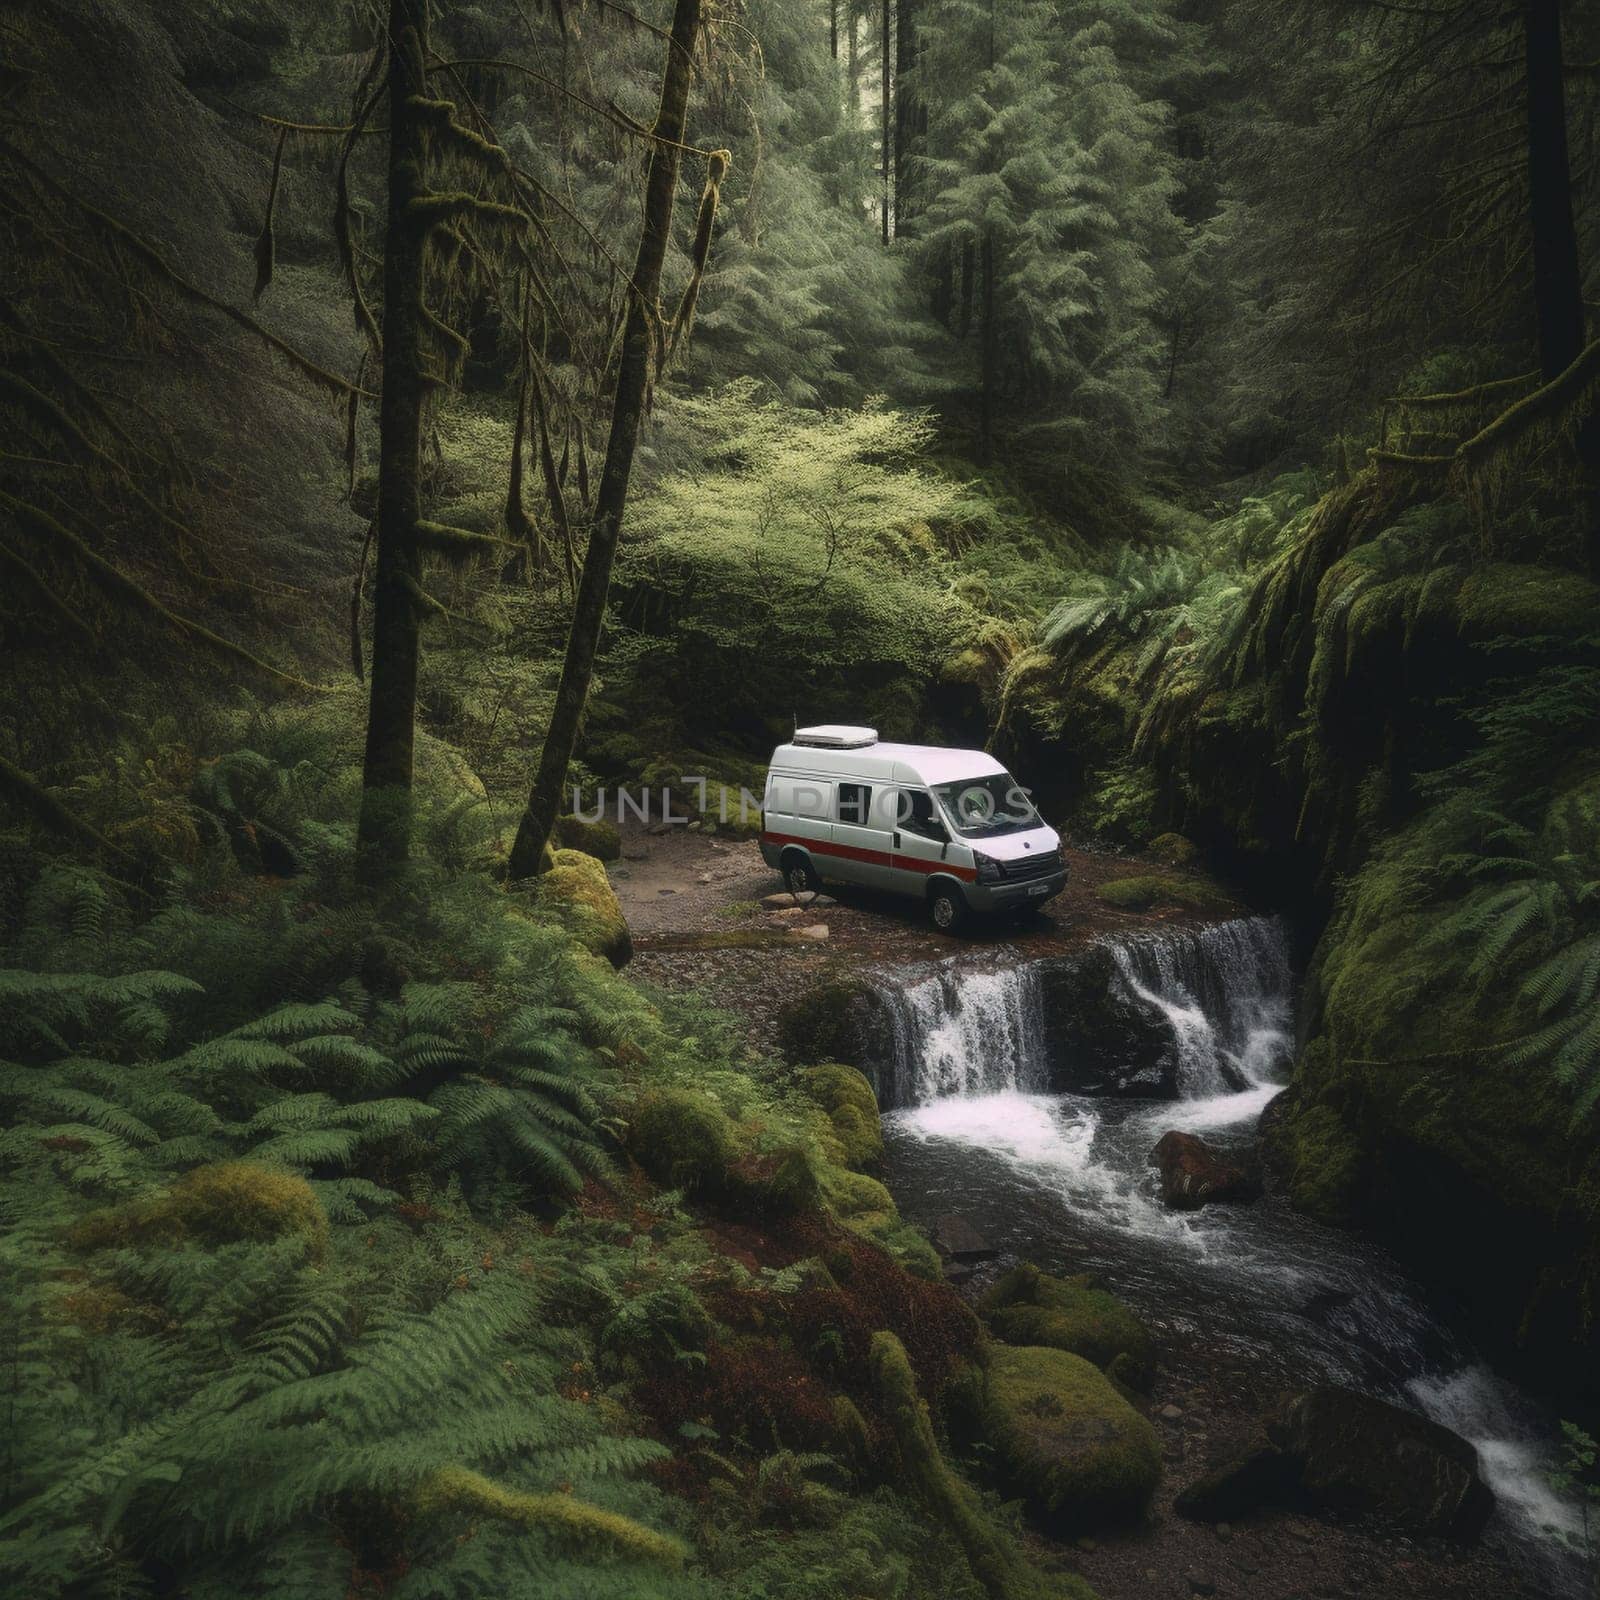 Escape to the peace and quiet of nature with this image of a camper van parked in a quiet forest clearing, with a small stream and a waterfall visible in the background. The van's exterior is covered in moss and ferns, blending seamlessly into the natural surroundings and becoming one with the environment. A pair of hiking boots and a backpack are visible on the ground, suggesting a day spent exploring the nearby trails and discovering the beauty of the forest. This is the perfect location for hikers, nature lovers, and anyone seeking the tranquility and beauty of the great outdoors.